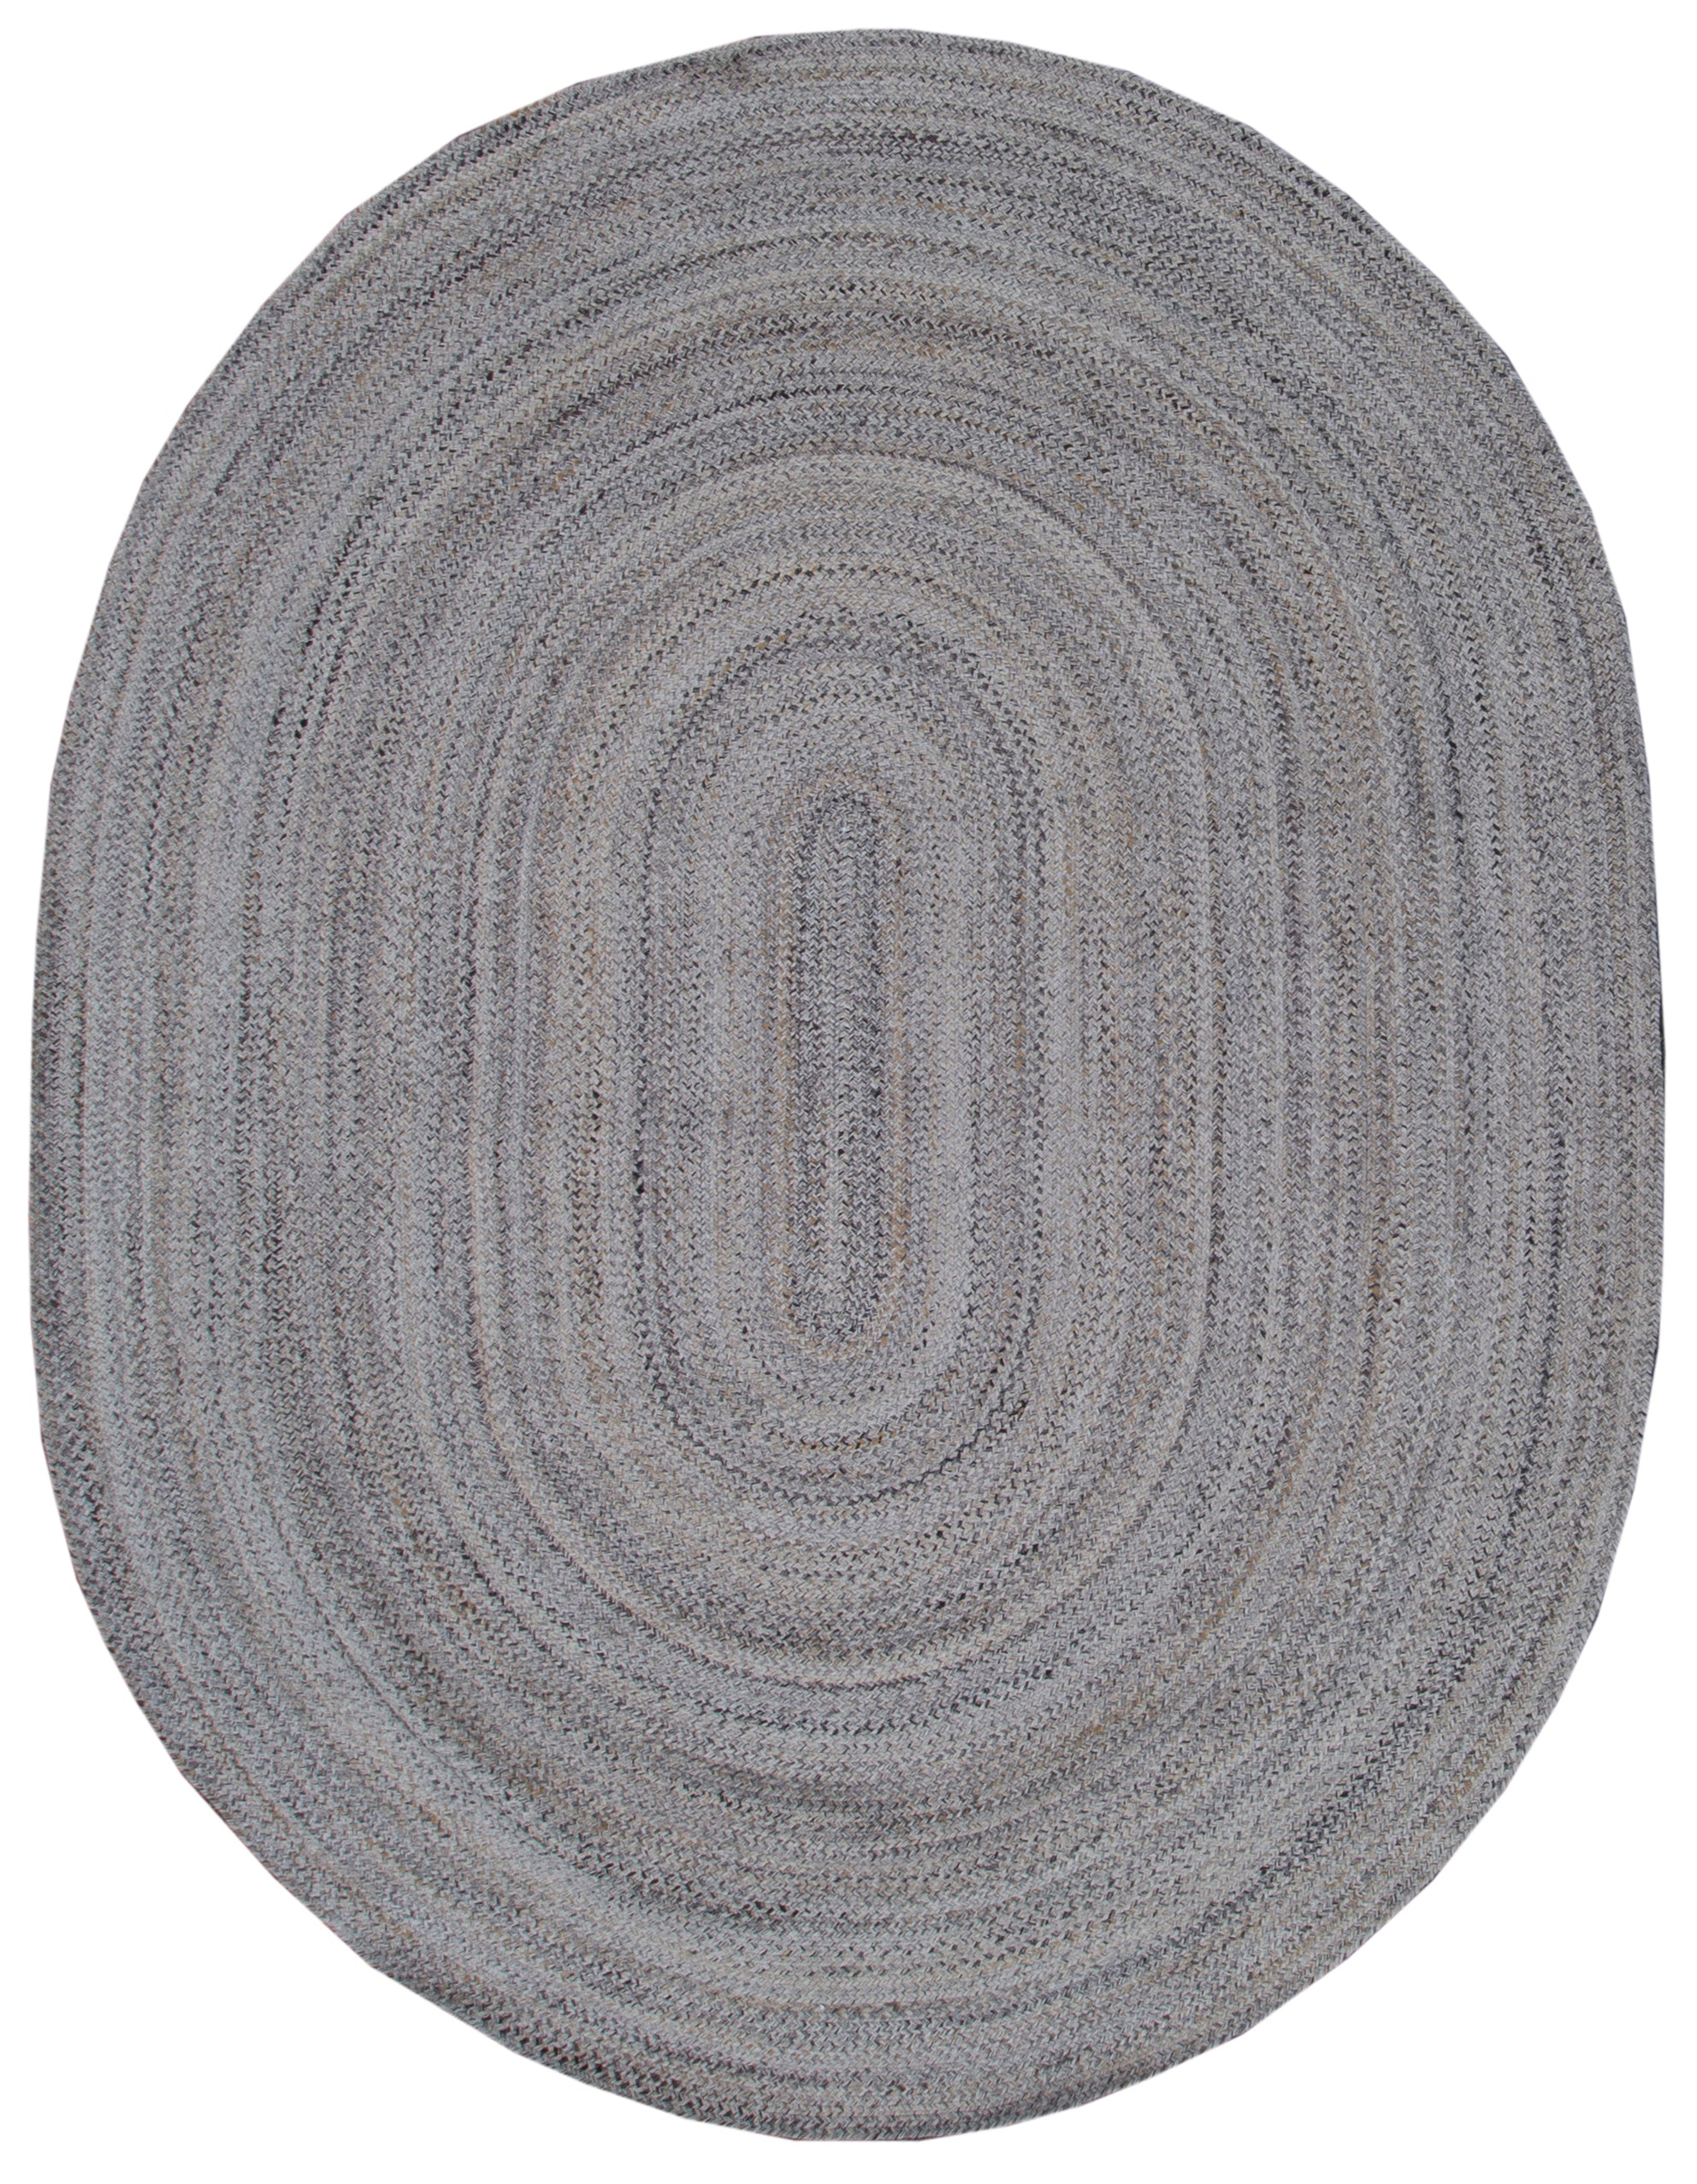 PYR1 Ivory Braided Oval Rug-Area rug for living room, dining area, and bedroom